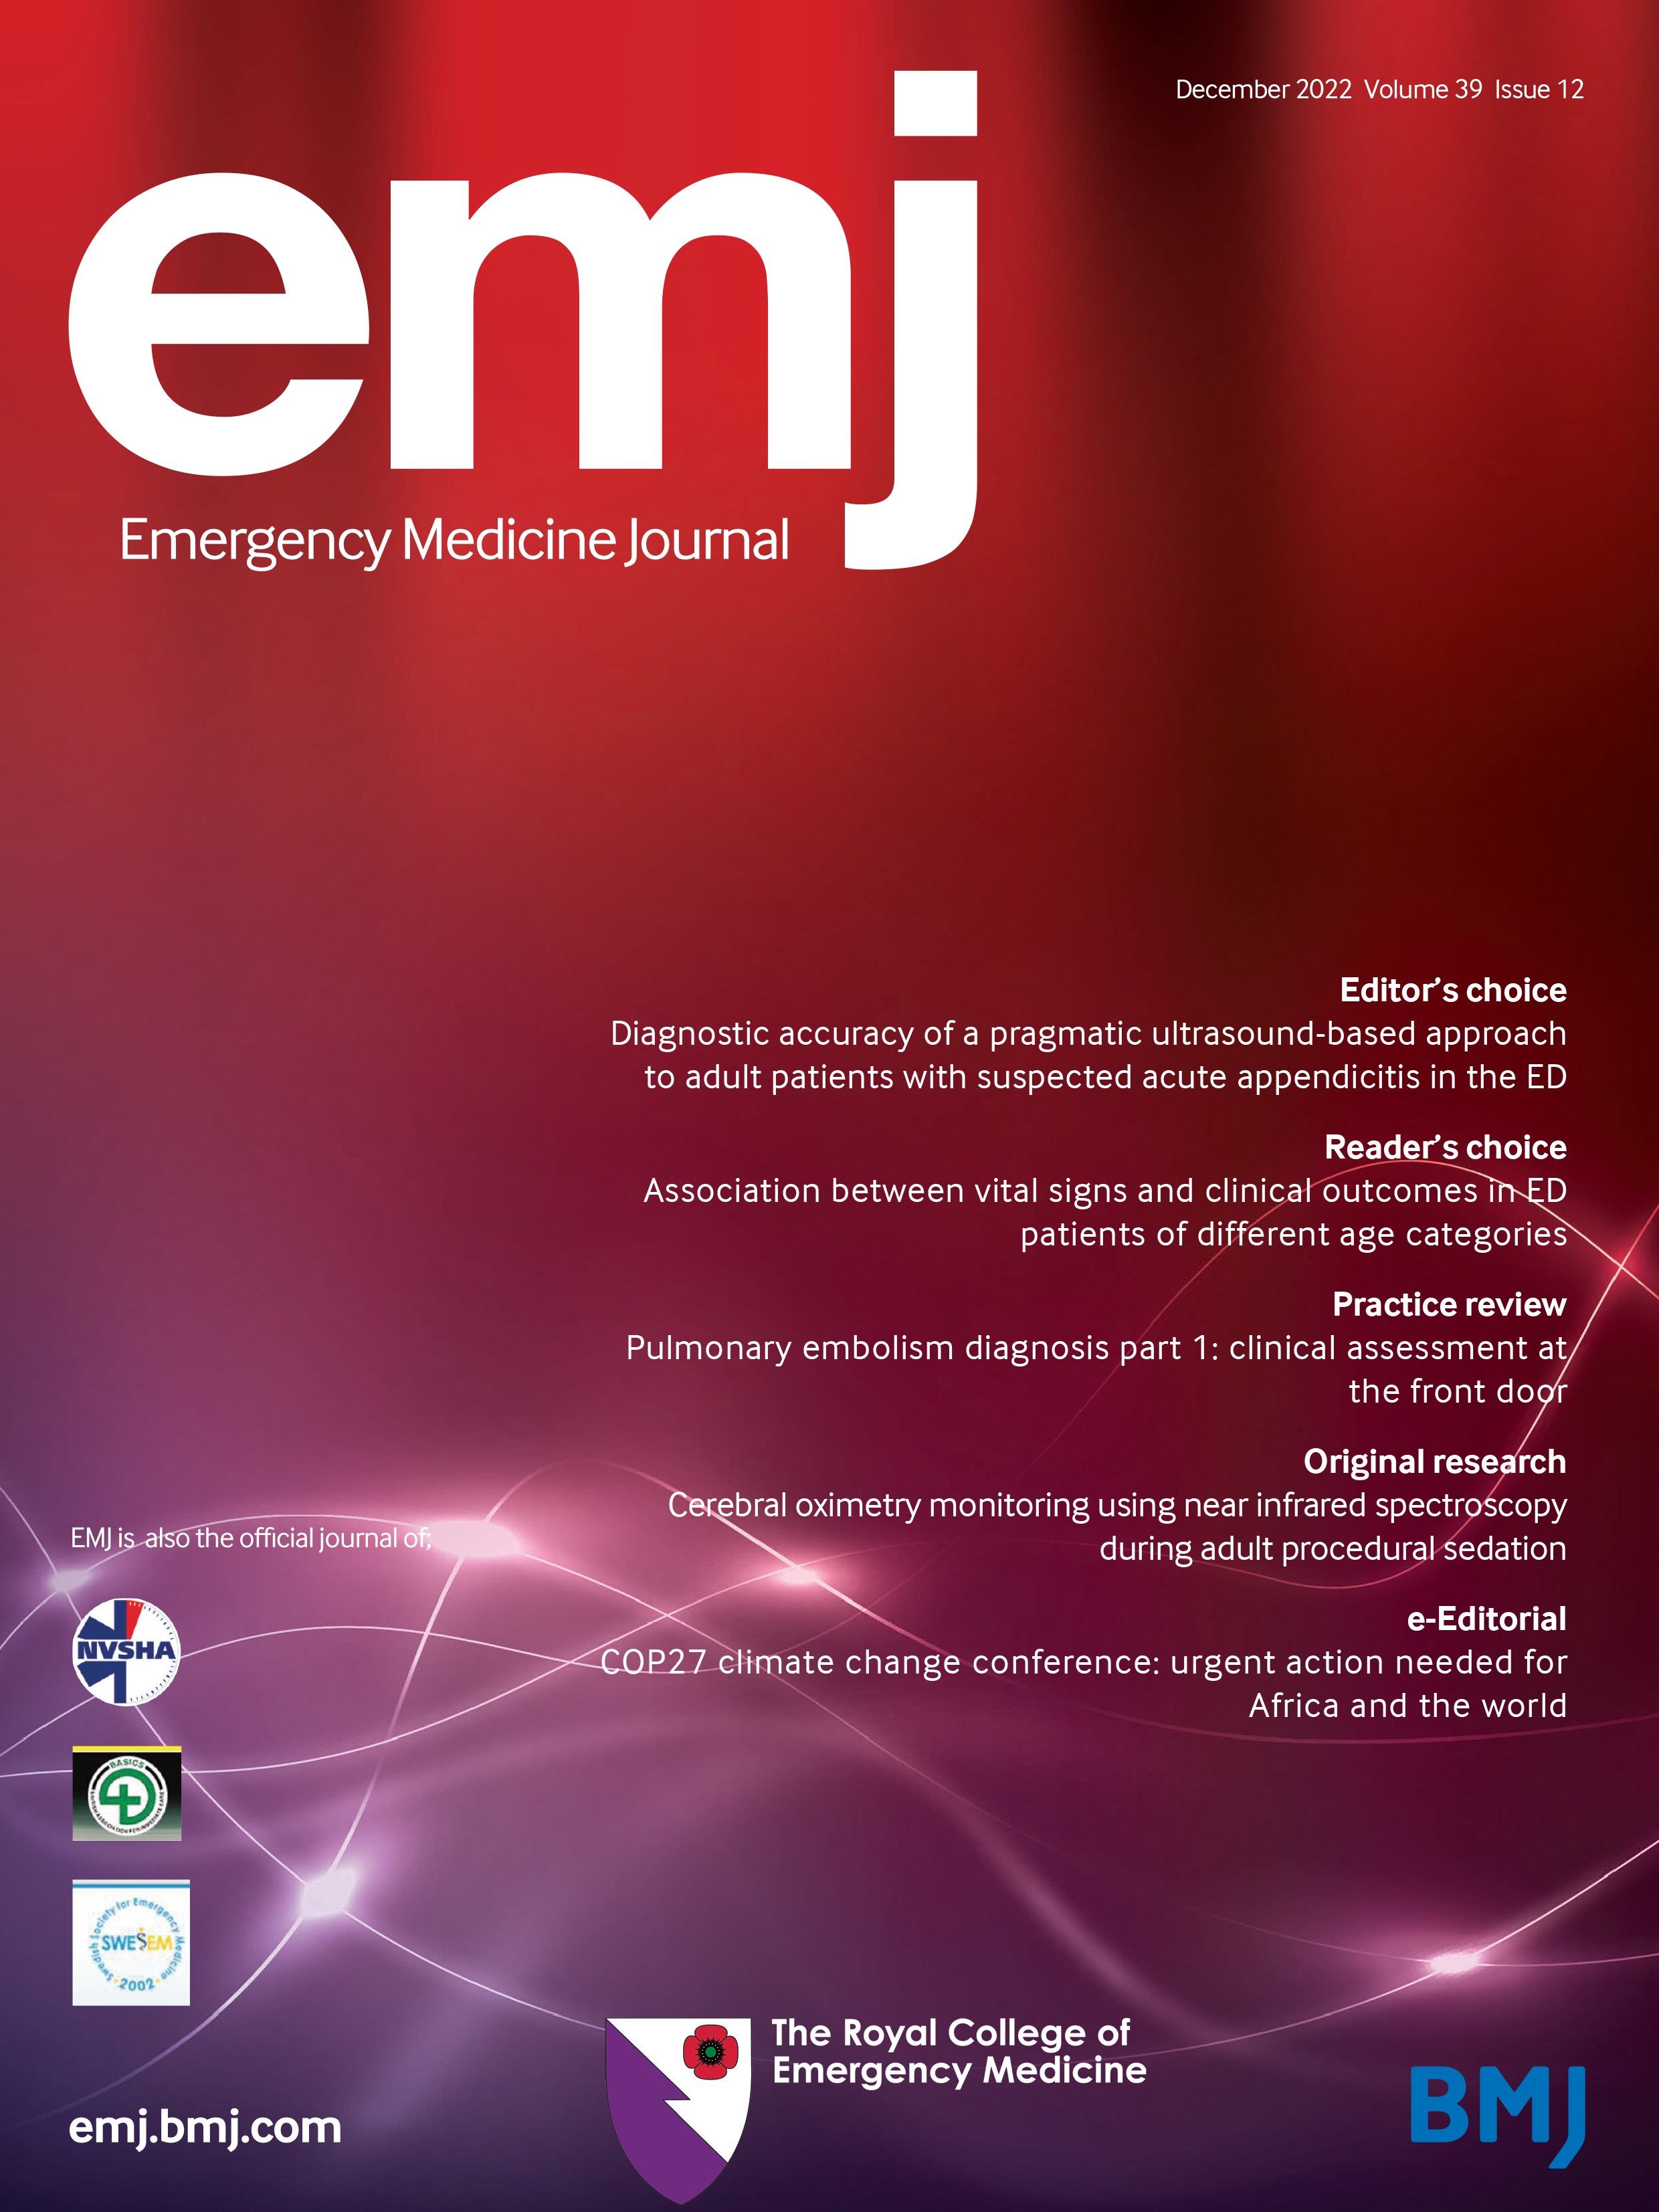 1491 Determinants of post-intubation hypotension in trauma patients following prehospital emergency anaesthesia